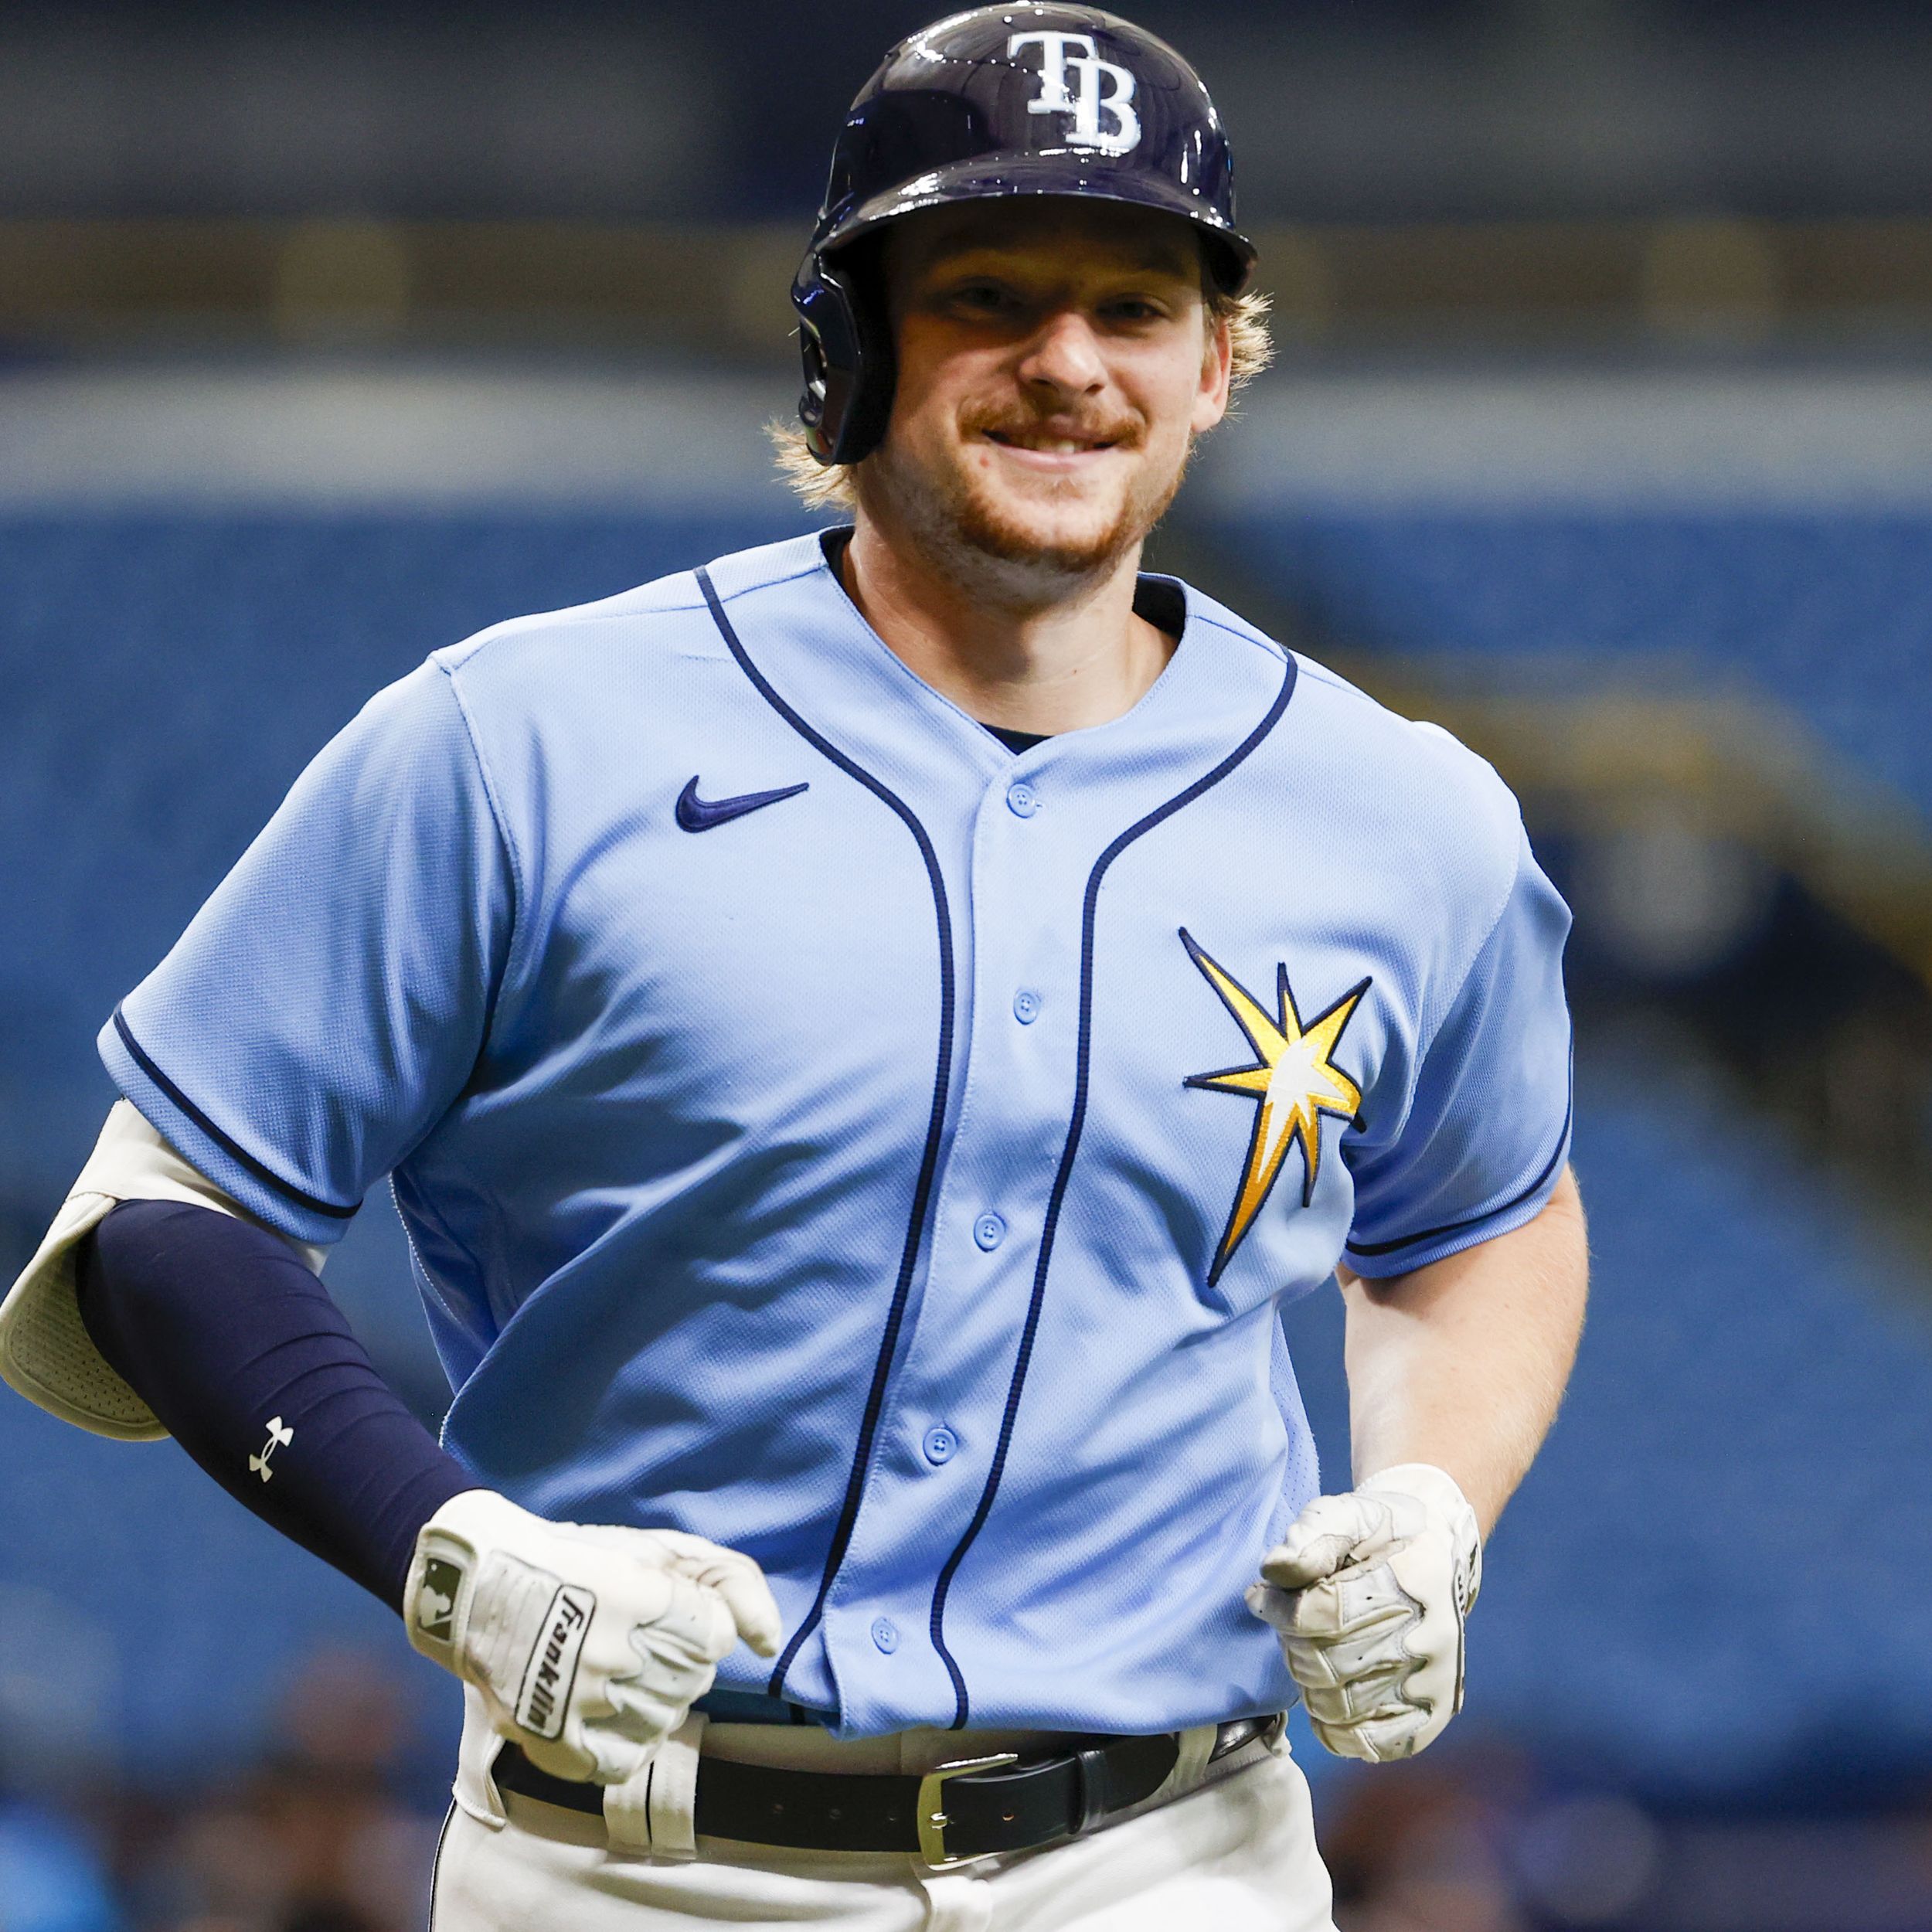 D-Rays trade for catcher Paul